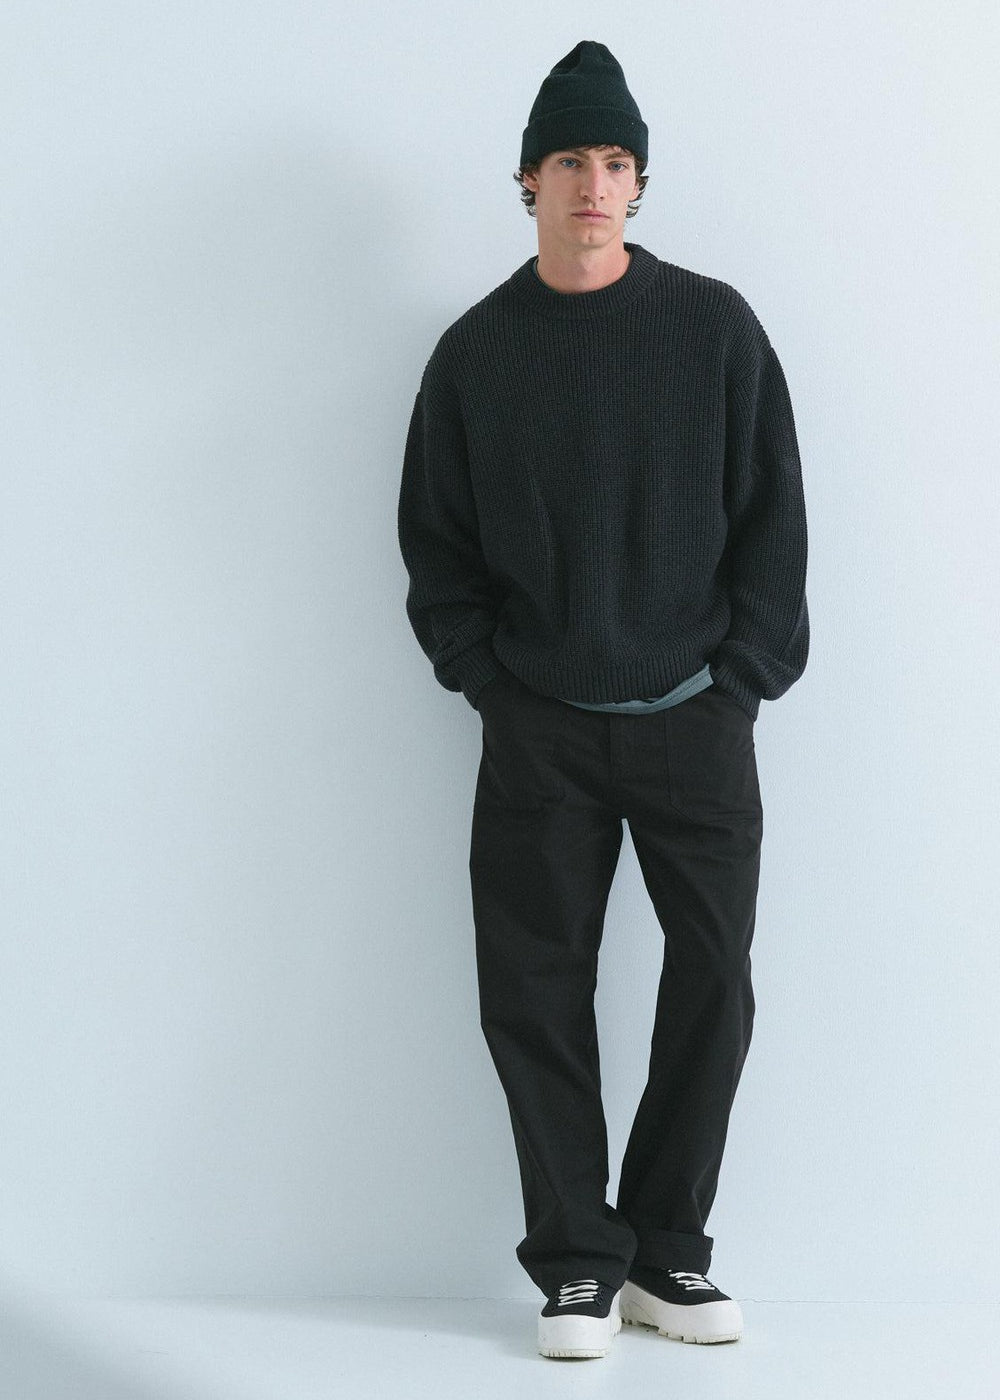 Commoners Drill Utility Pant / Black | COMMONERS | Mad About The Boy